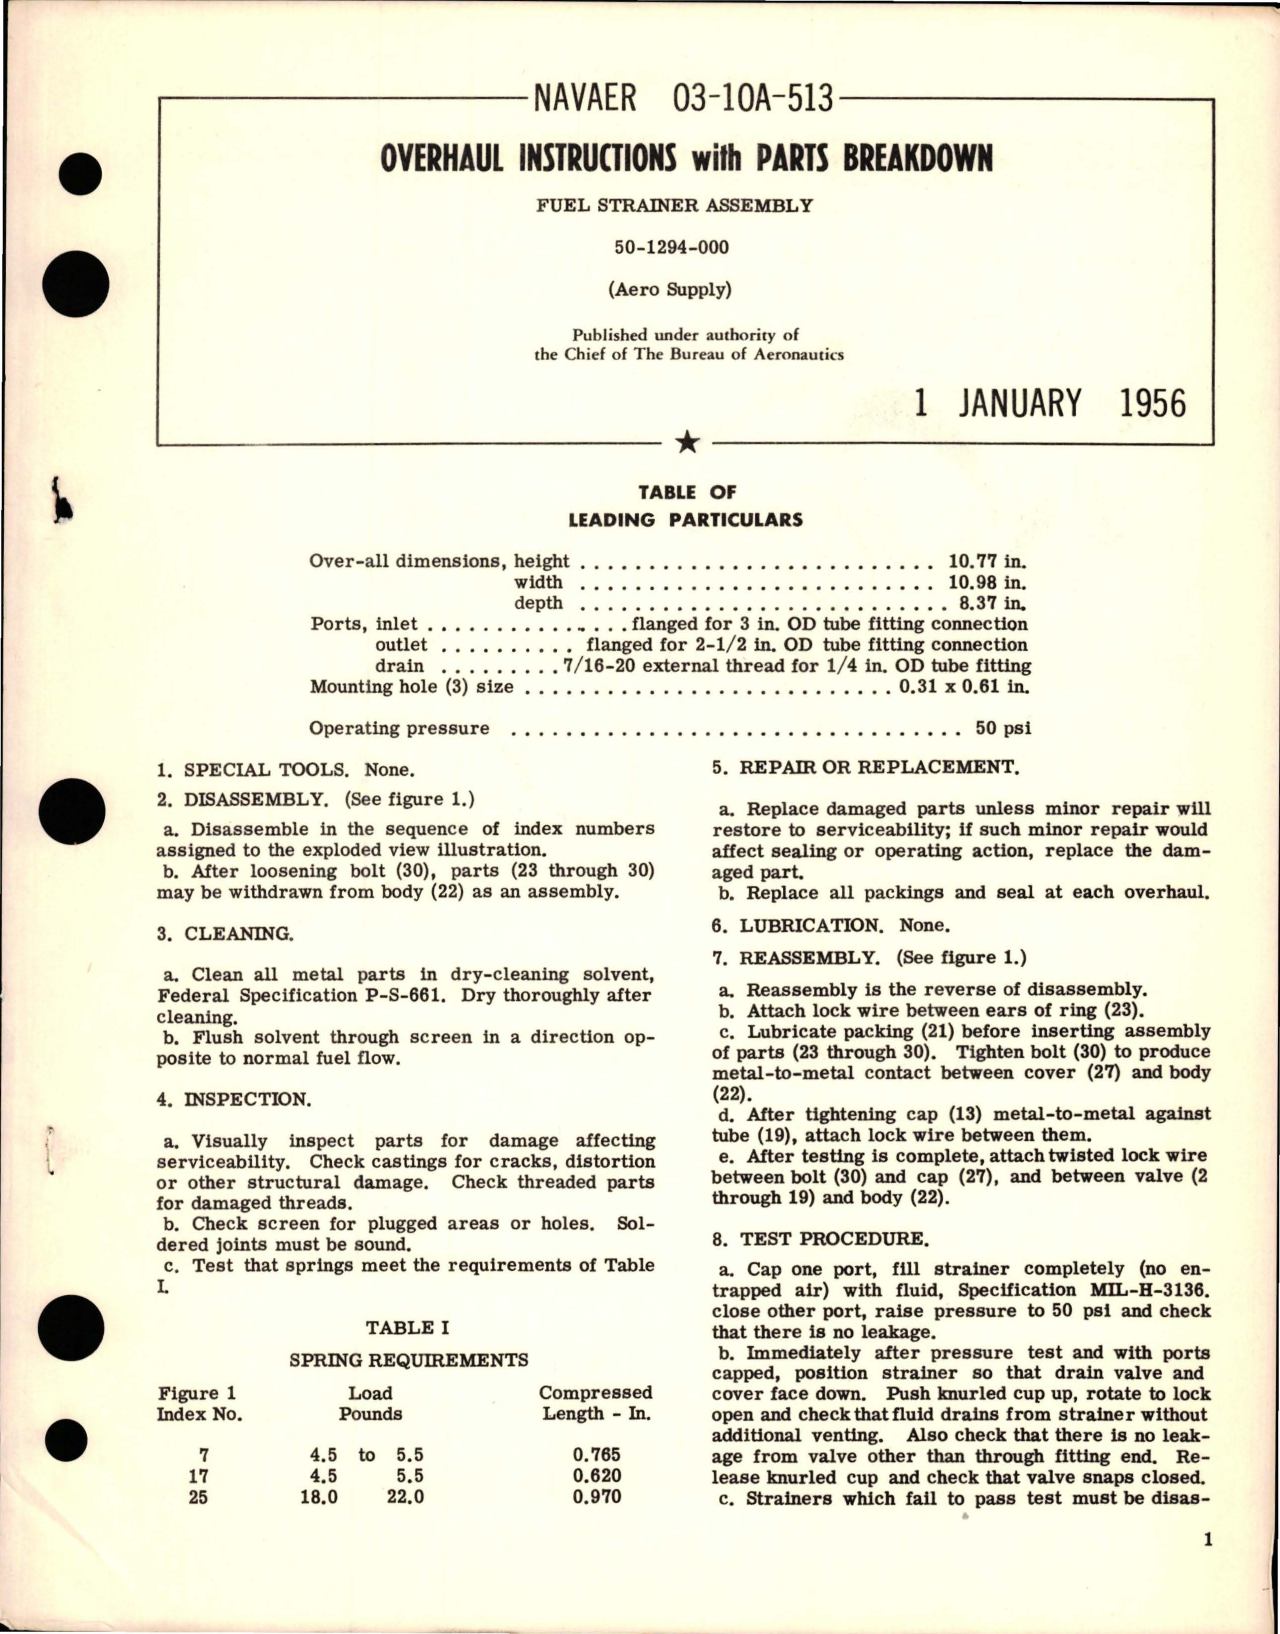 Sample page 1 from AirCorps Library document: Overhaul Instructions with Parts Breakdown for Fuel Strainer Assembly - 50-1294-000 